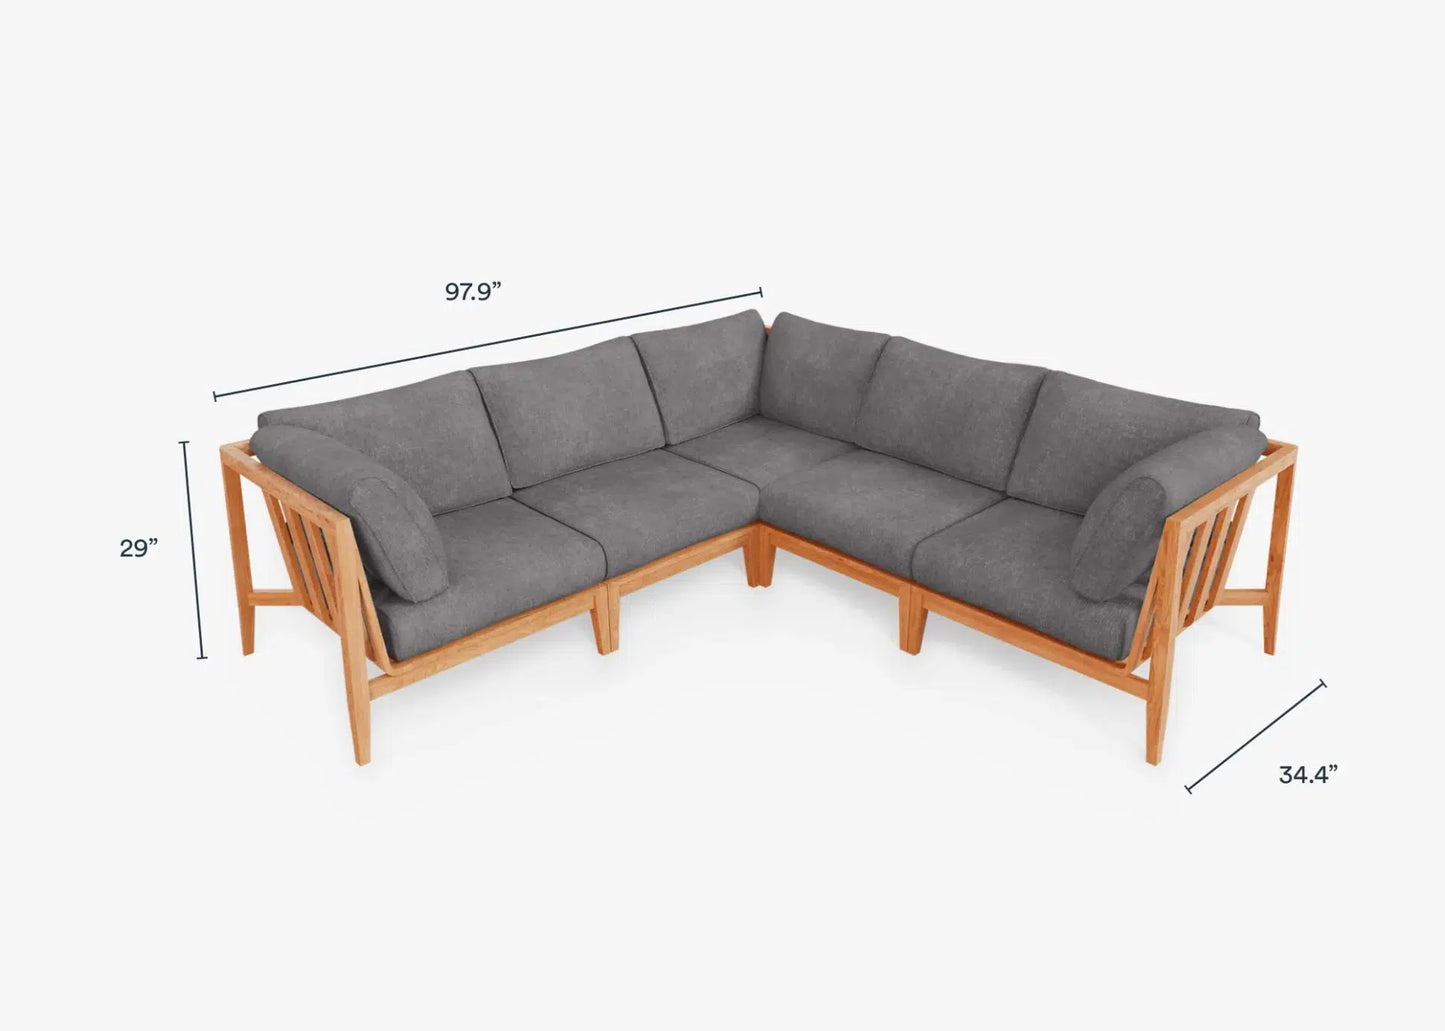 Live Outer 98" x 98" Teak Outdoor Corner Sectional 5-Seat With Dark Pebble Gray Cushion